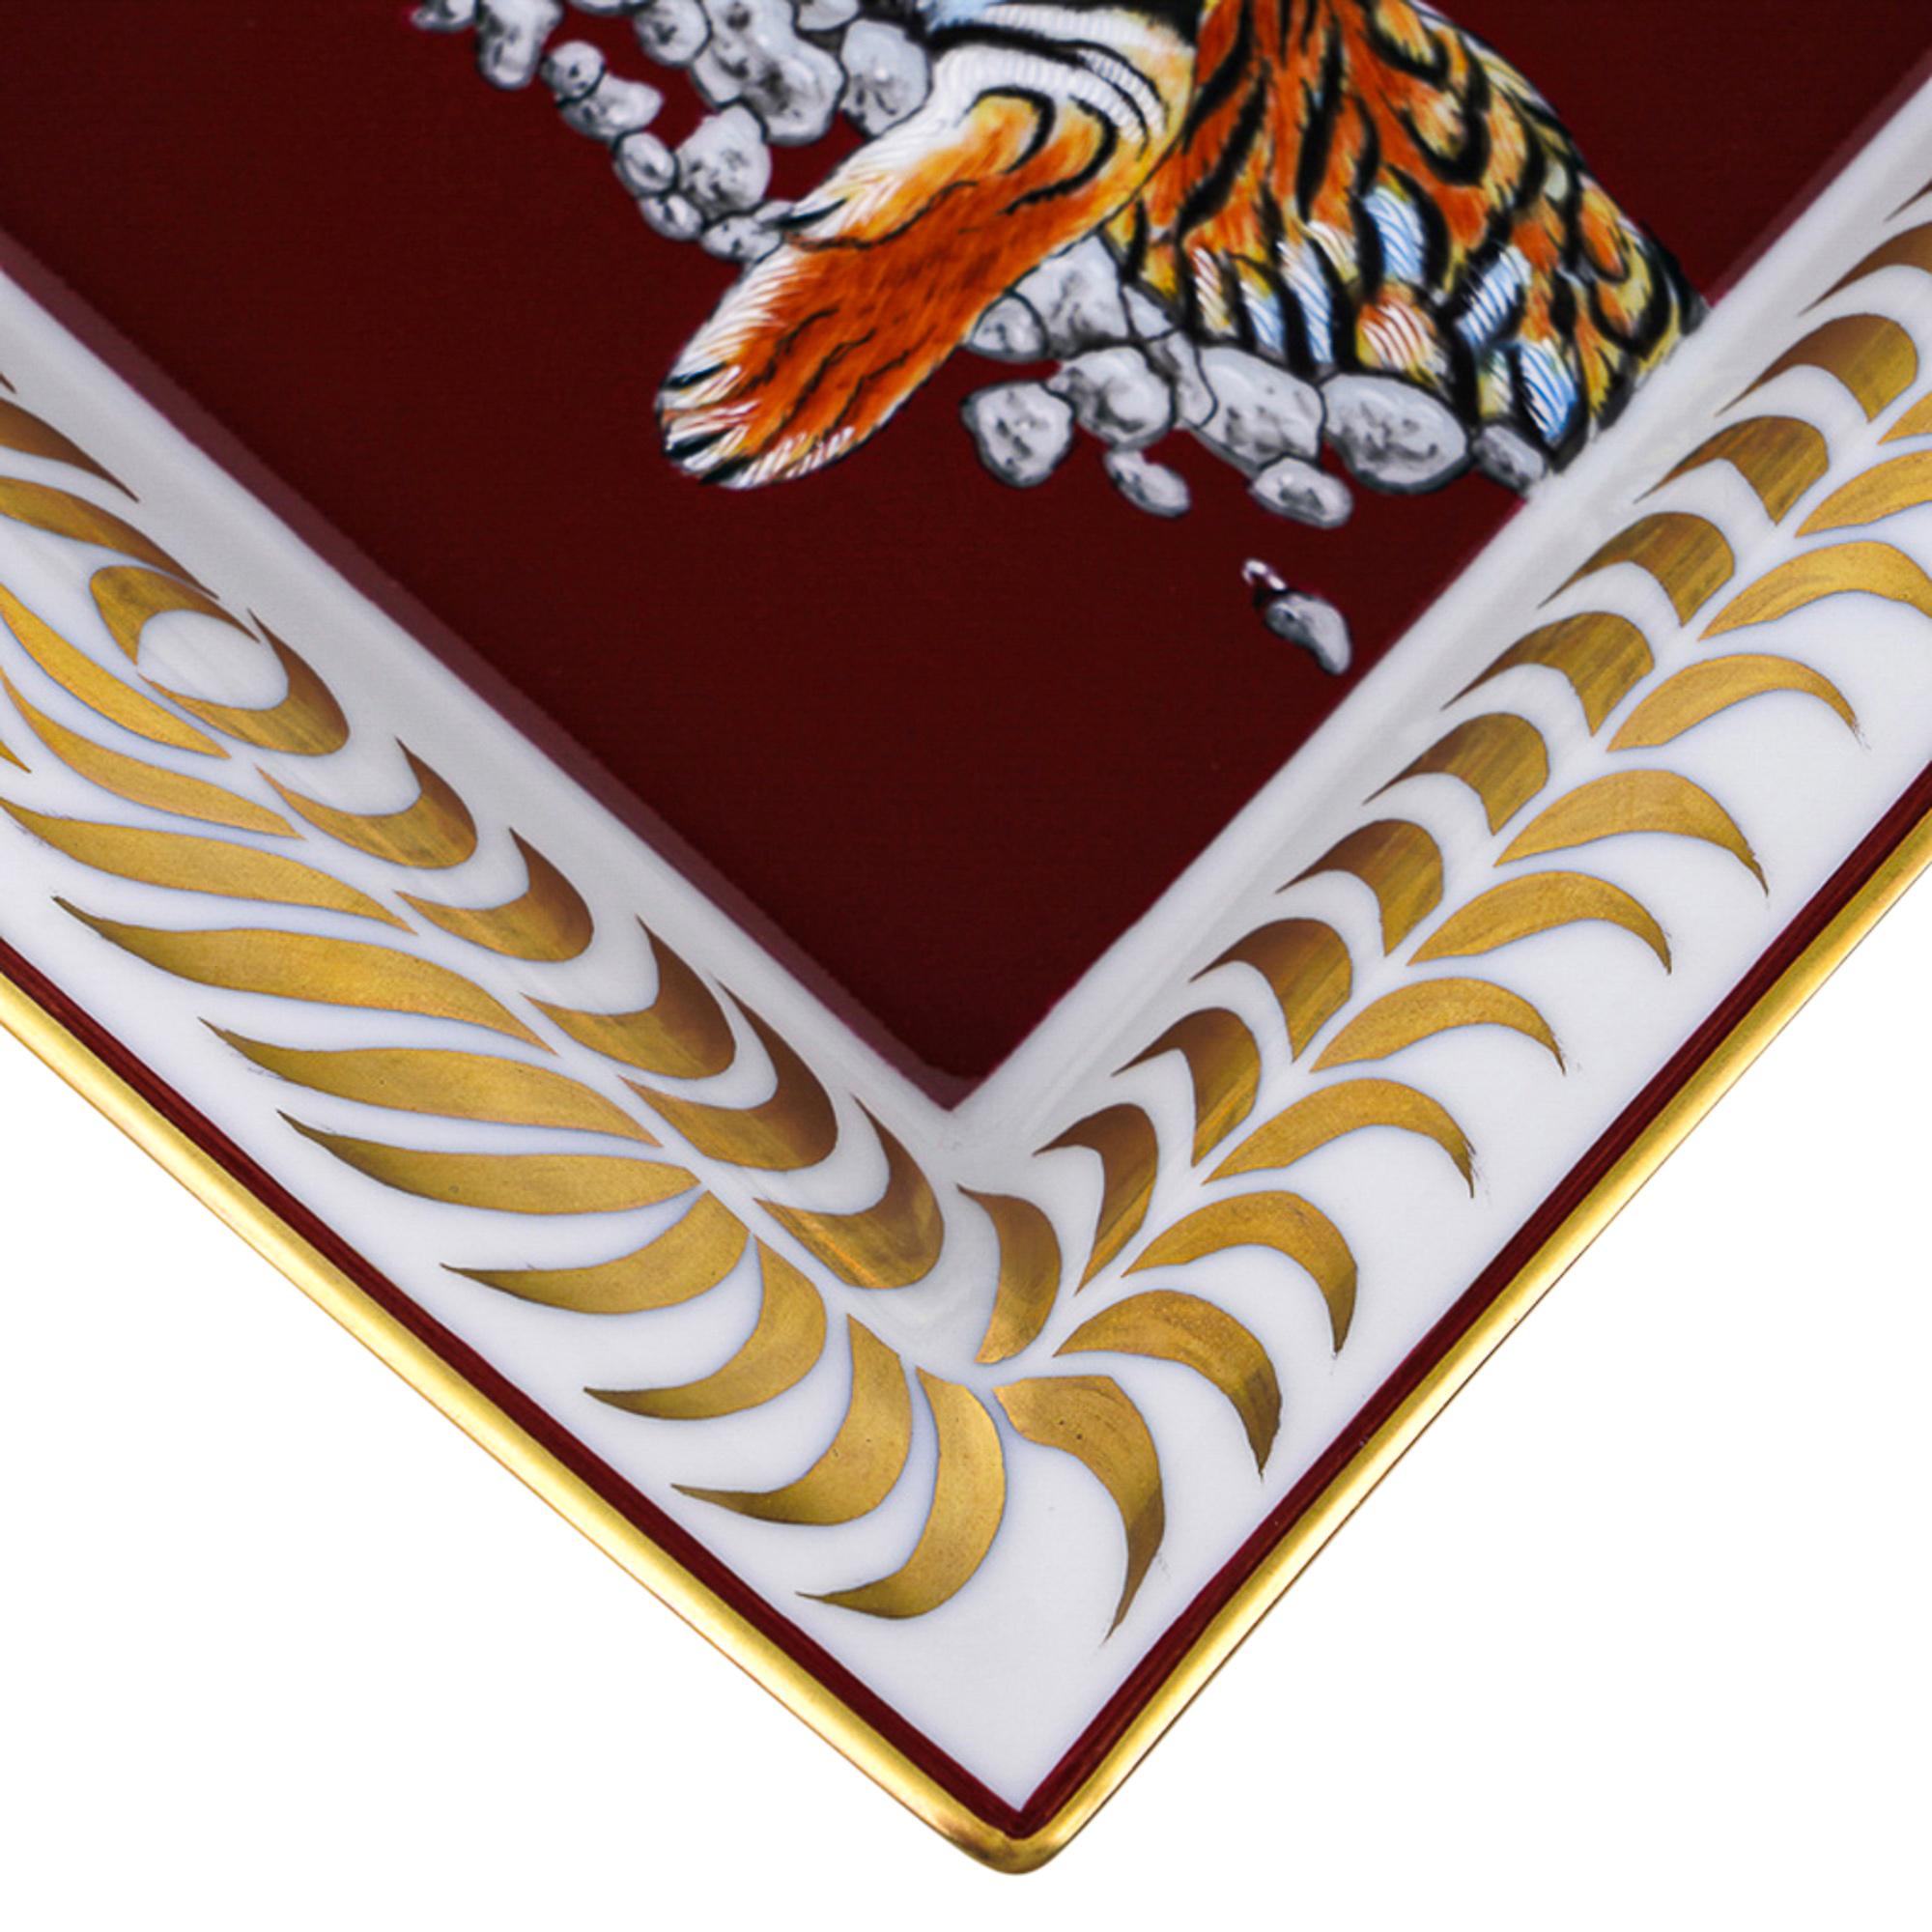 Women's or Men's Hermes Change Tray Tigre Royal Or/Rouge Hand Painted New w/ Box